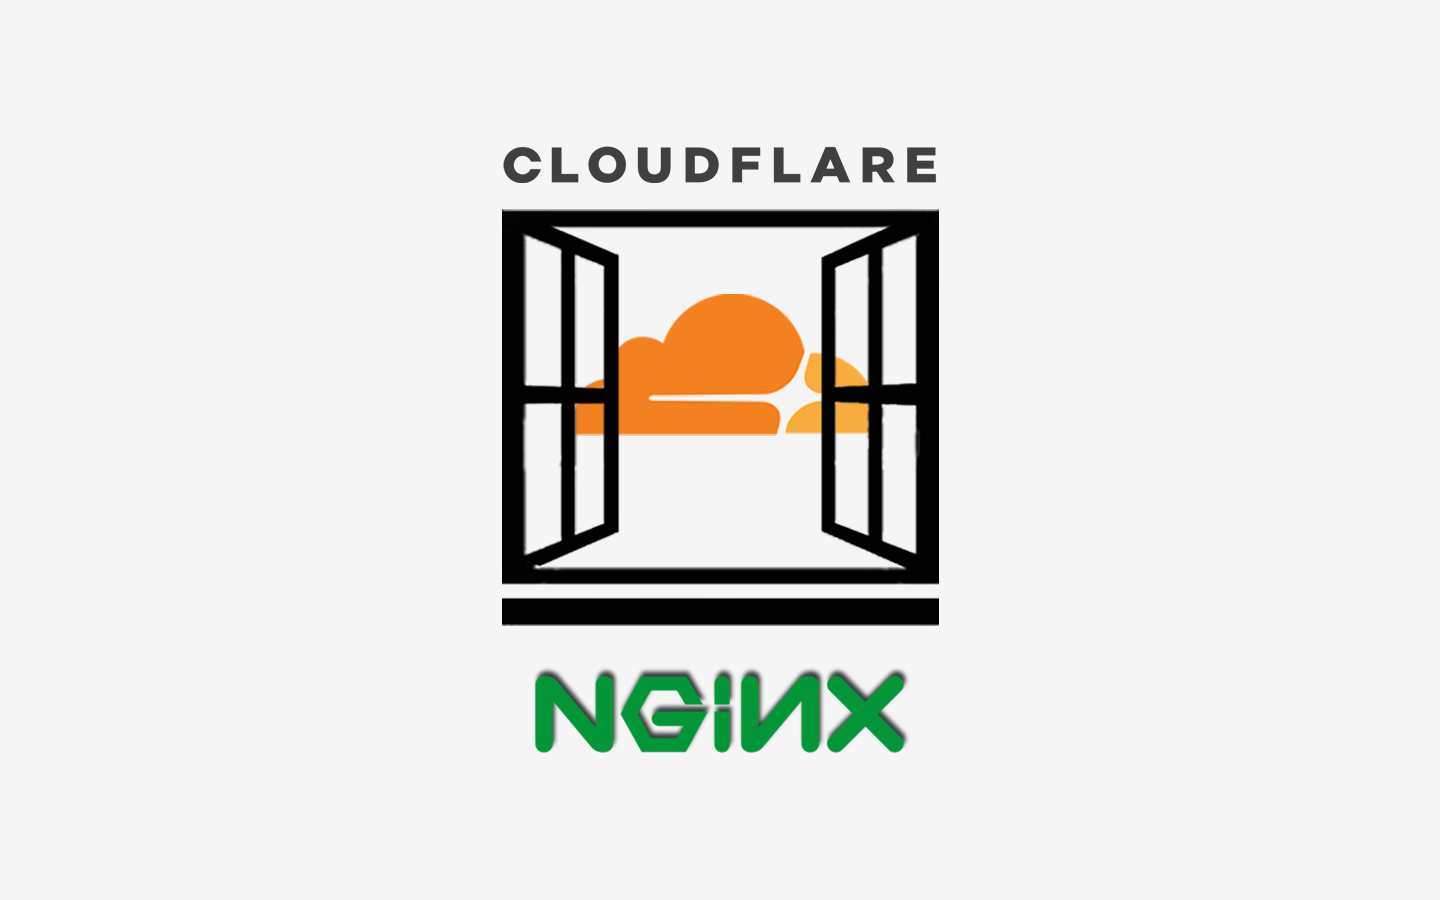 Get Your Visitors Real IP Addresses with Nginx and CloudFlare